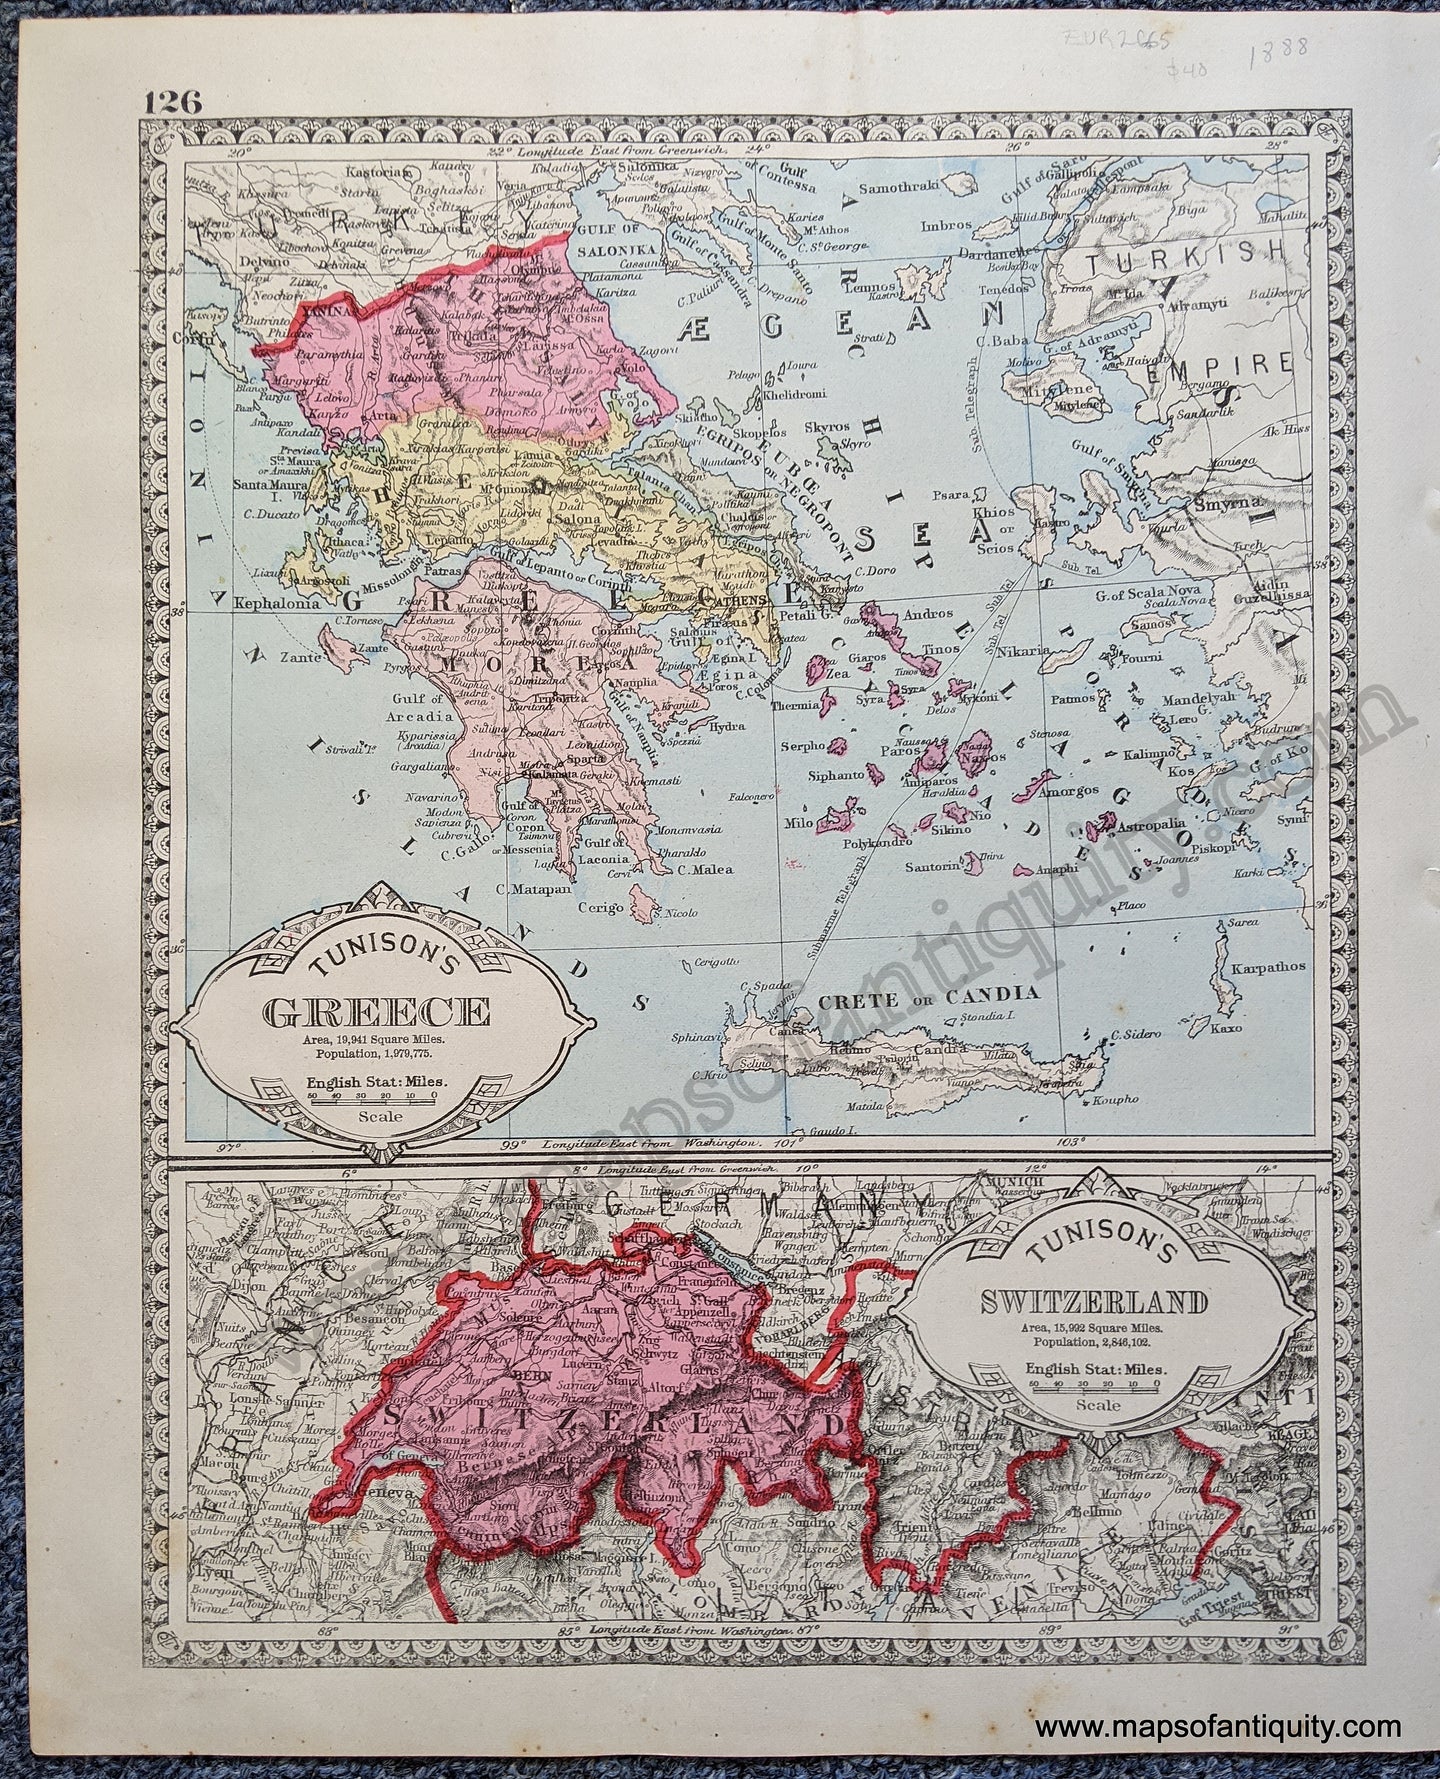 Antique-Map-Tunison's-Greece-and-Tunison's-Switzerland;-verso:-Tunison's-Turkey-in-Europe-Roumania-Servia-and-Montenegro-Europe--1888-Tunison-Maps-Of-Antiquity-1800s-19th-century